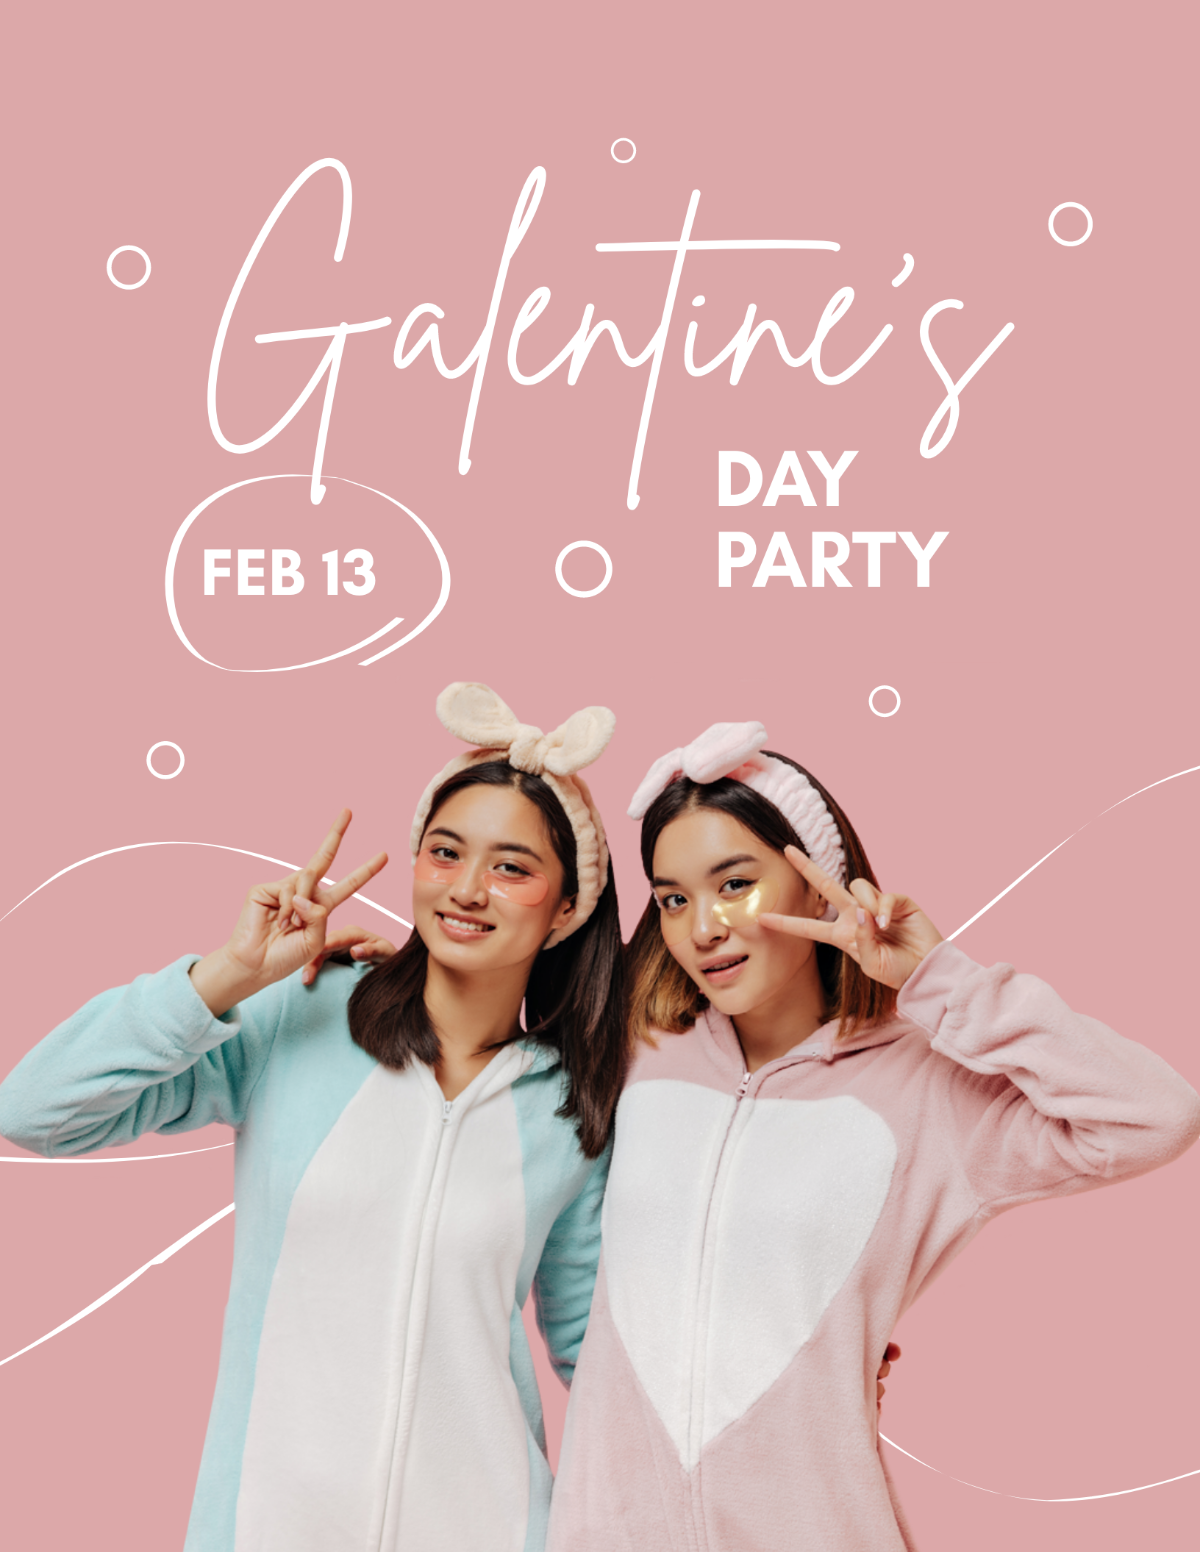 Free Galentines Day Party Flyer Template